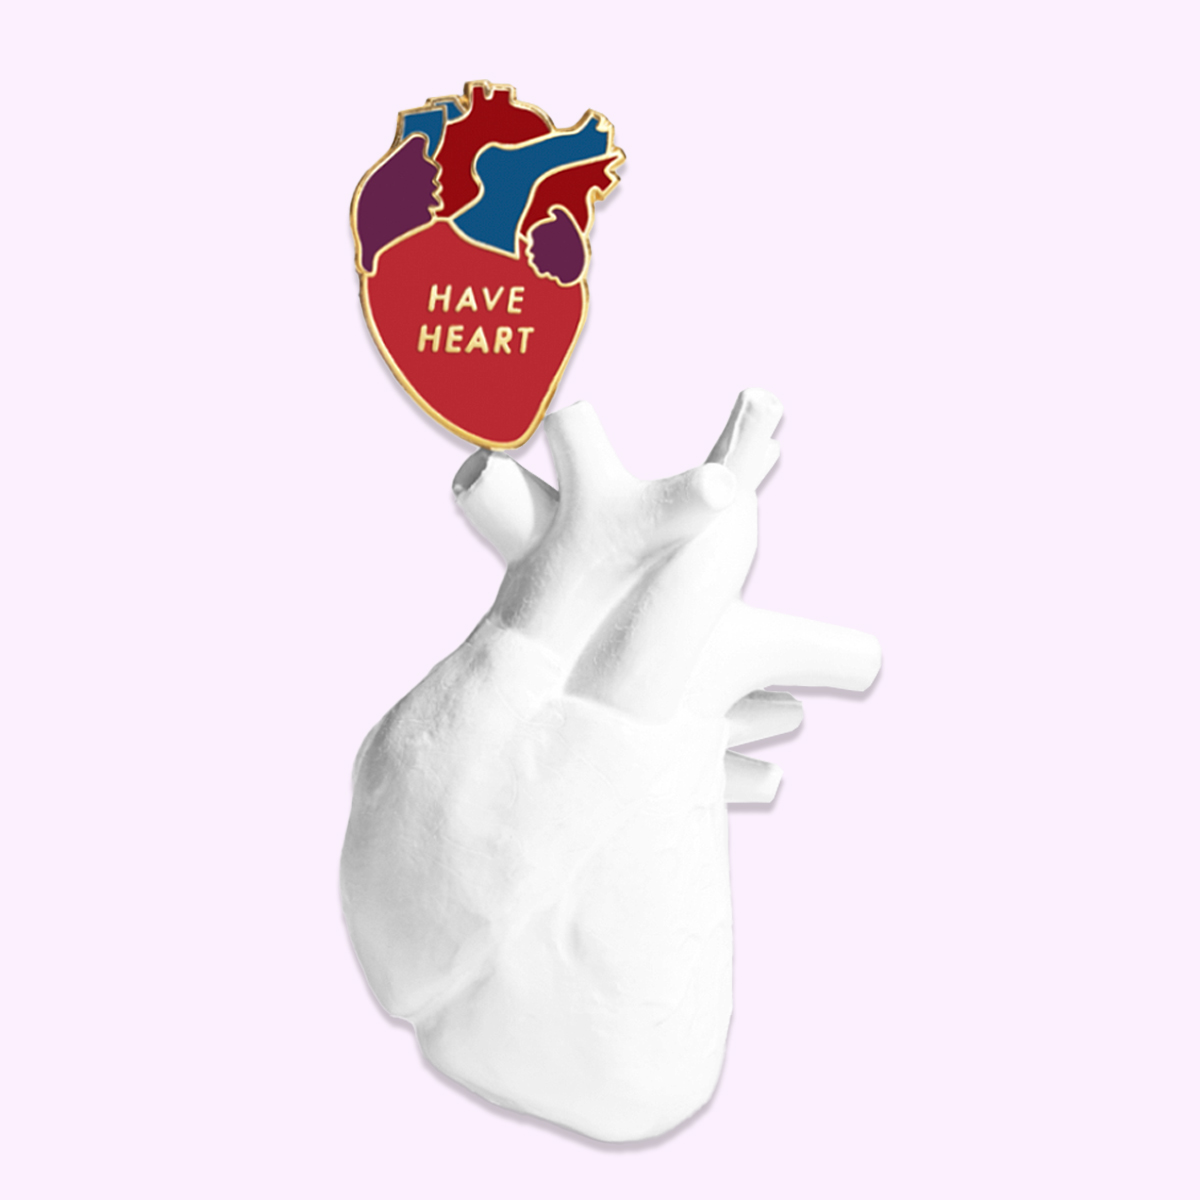 Have Heart Lapel Pin